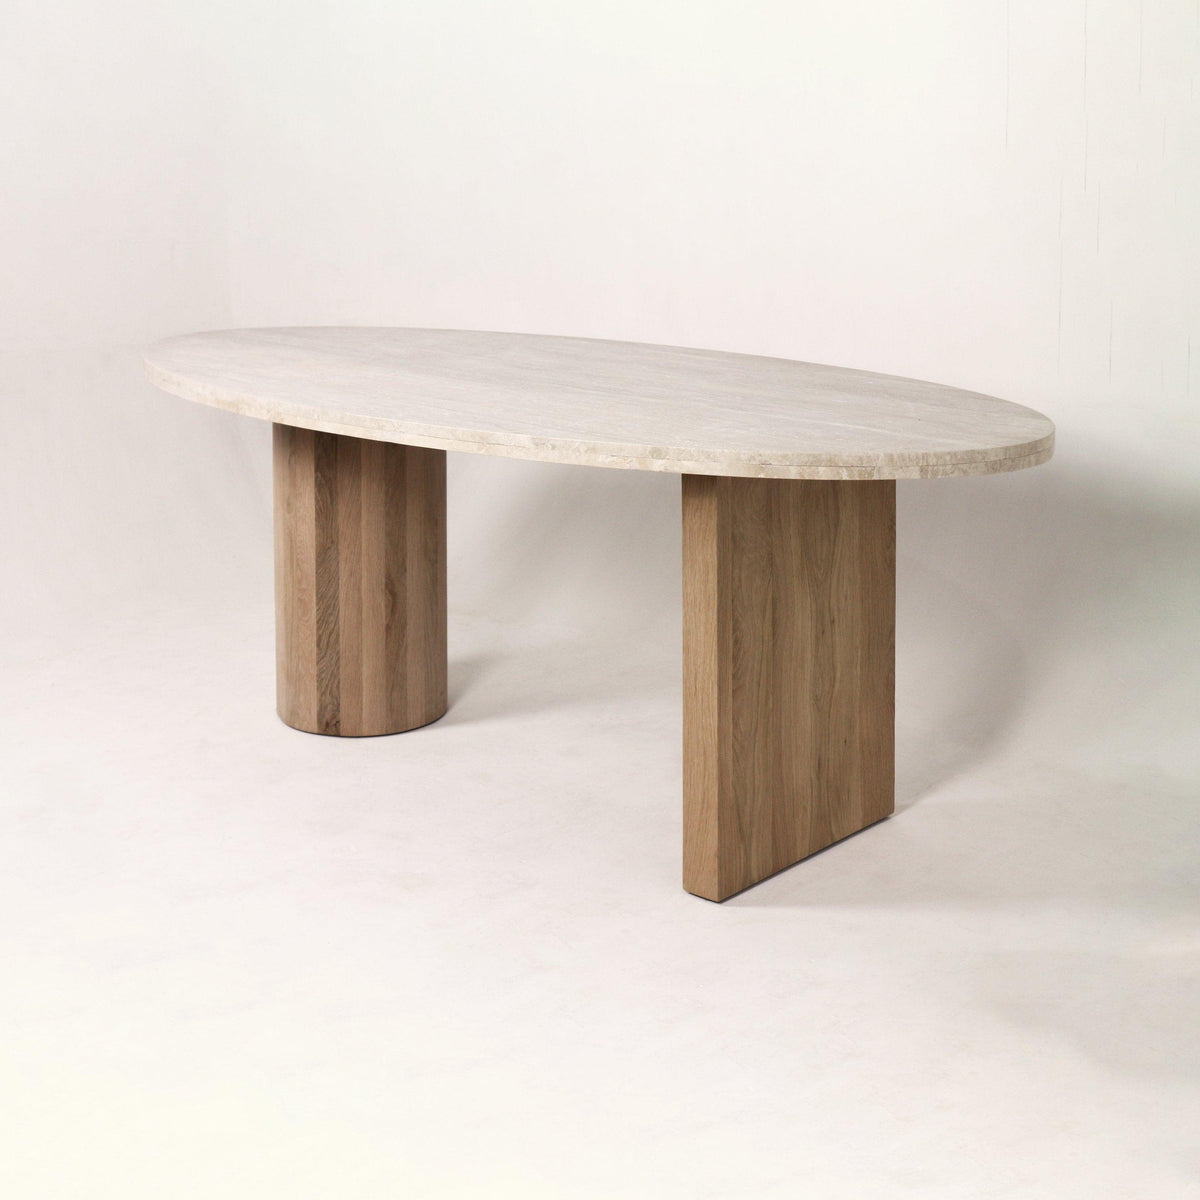 Focus Dining Table in Oak Natural Finish with Travertine - INTERIORTONIC